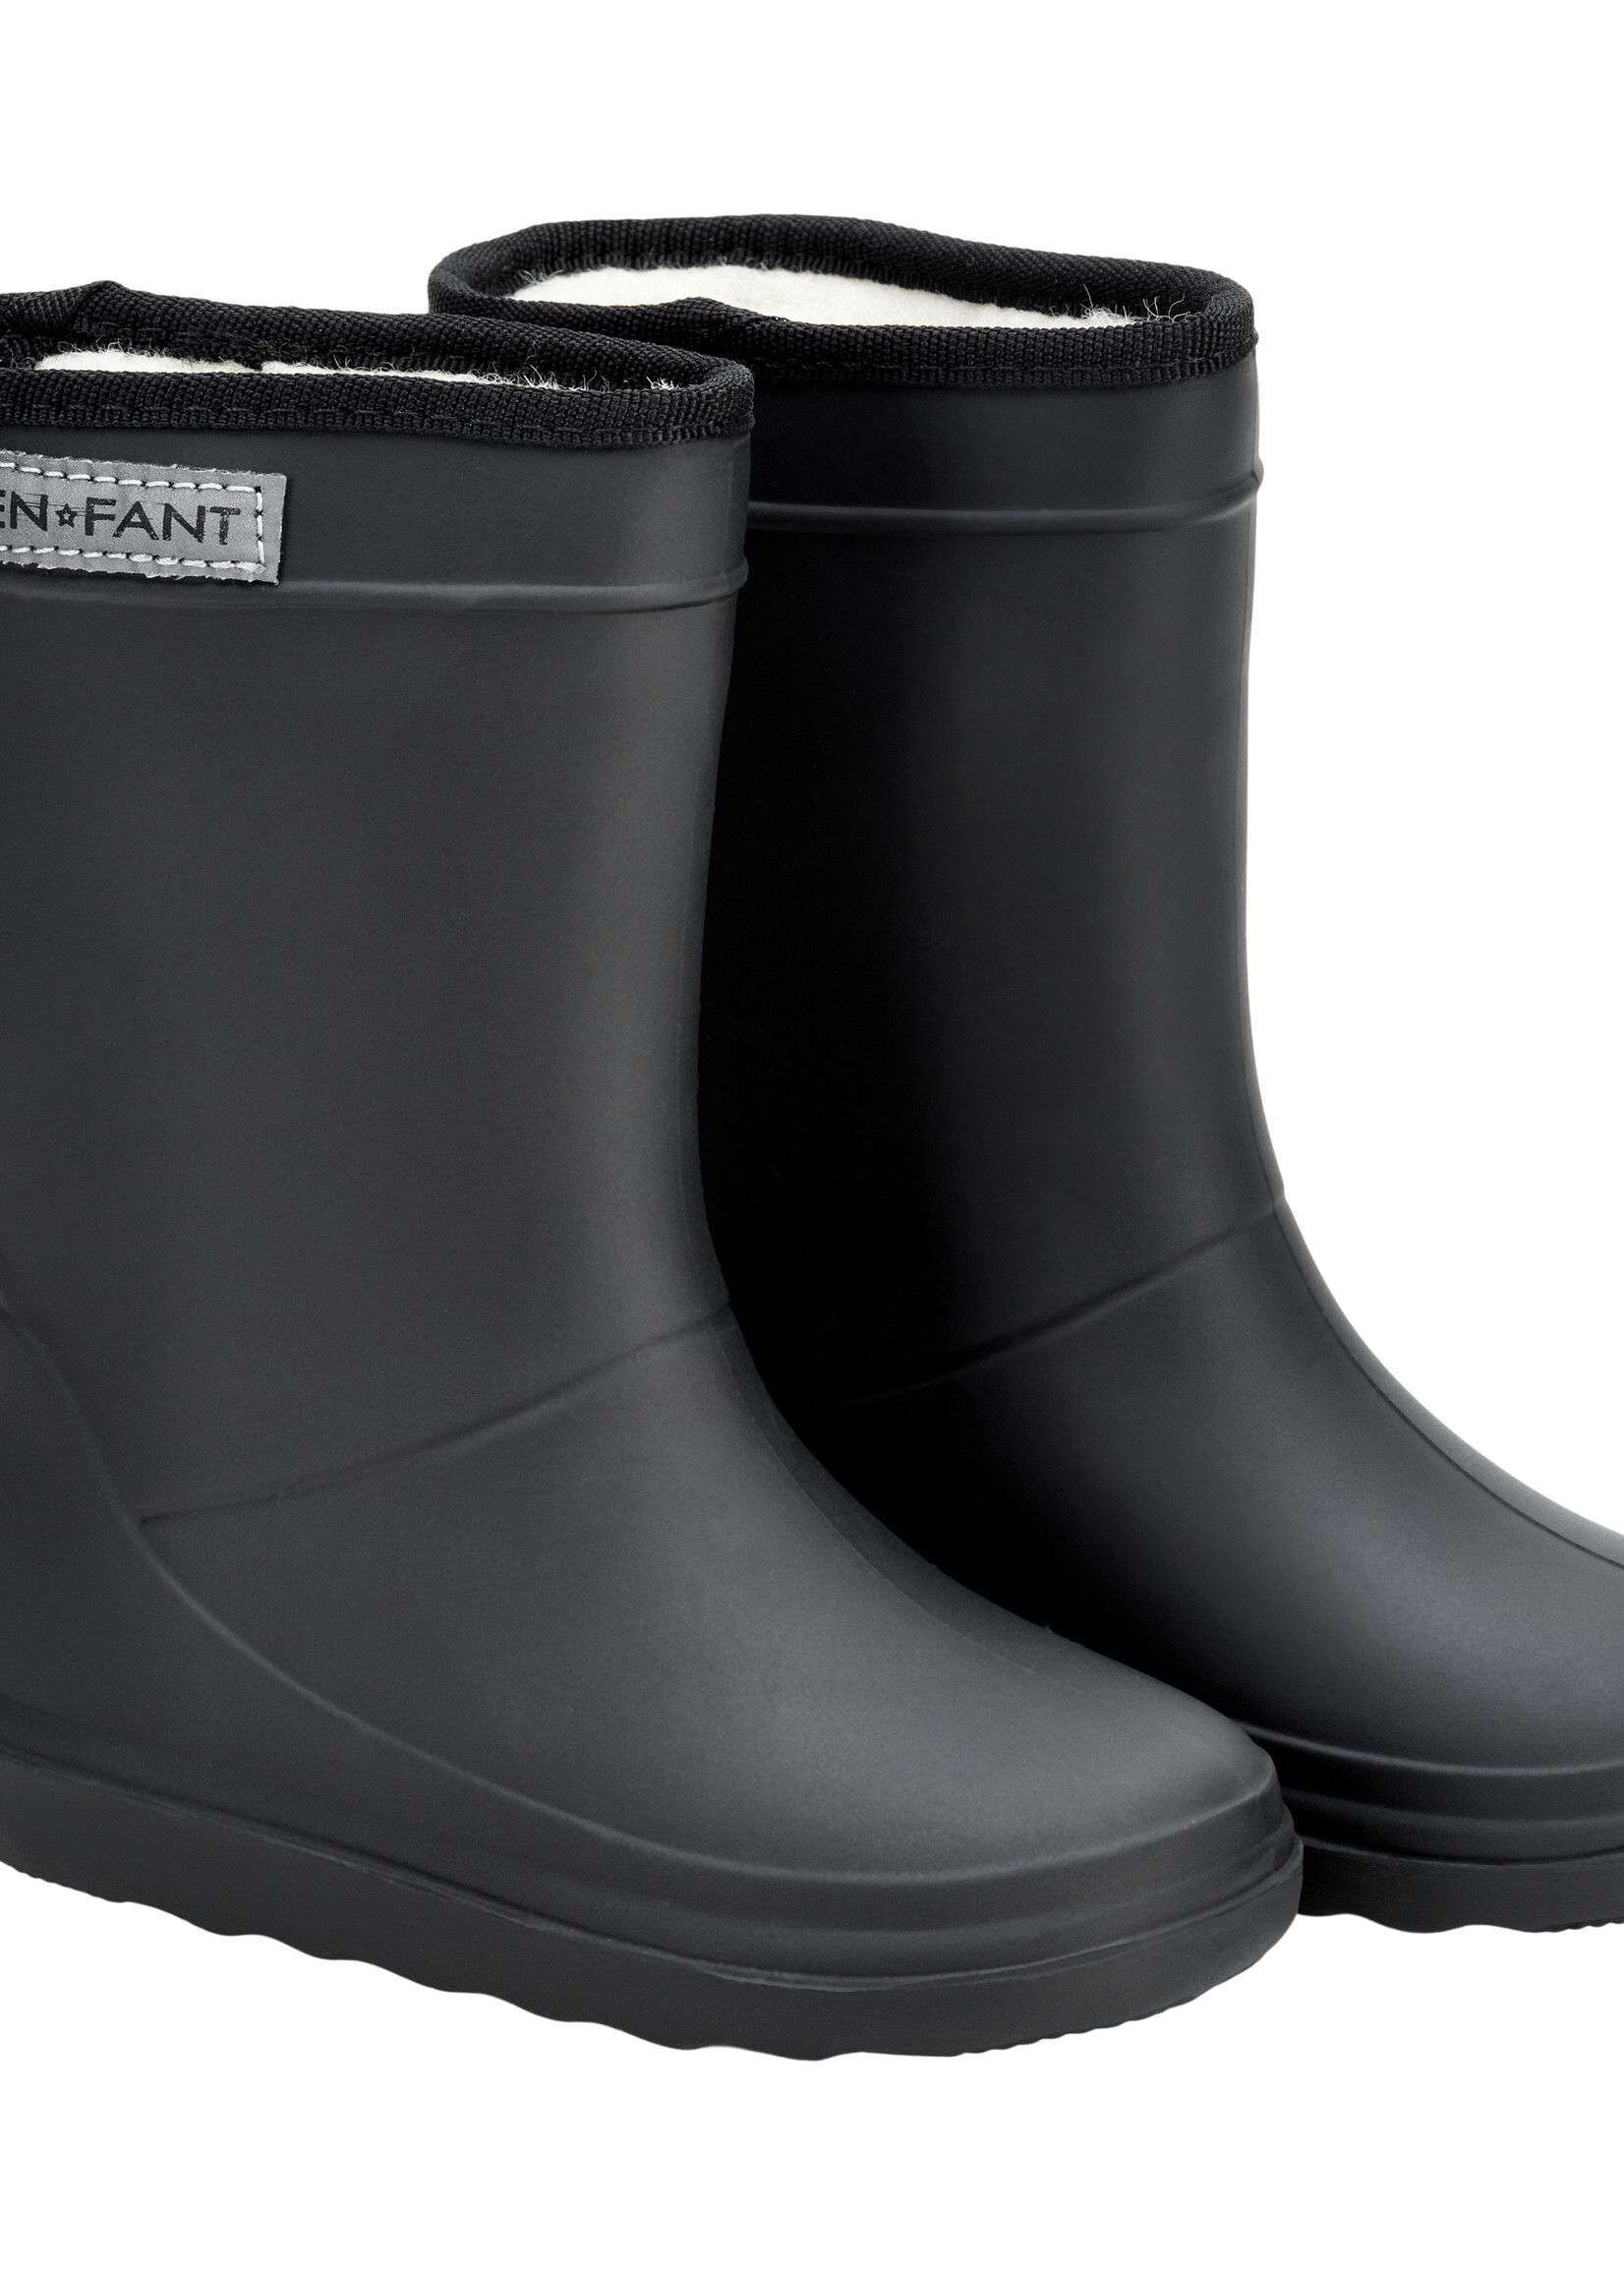 ENFANT Thermo Boots, Black, W23